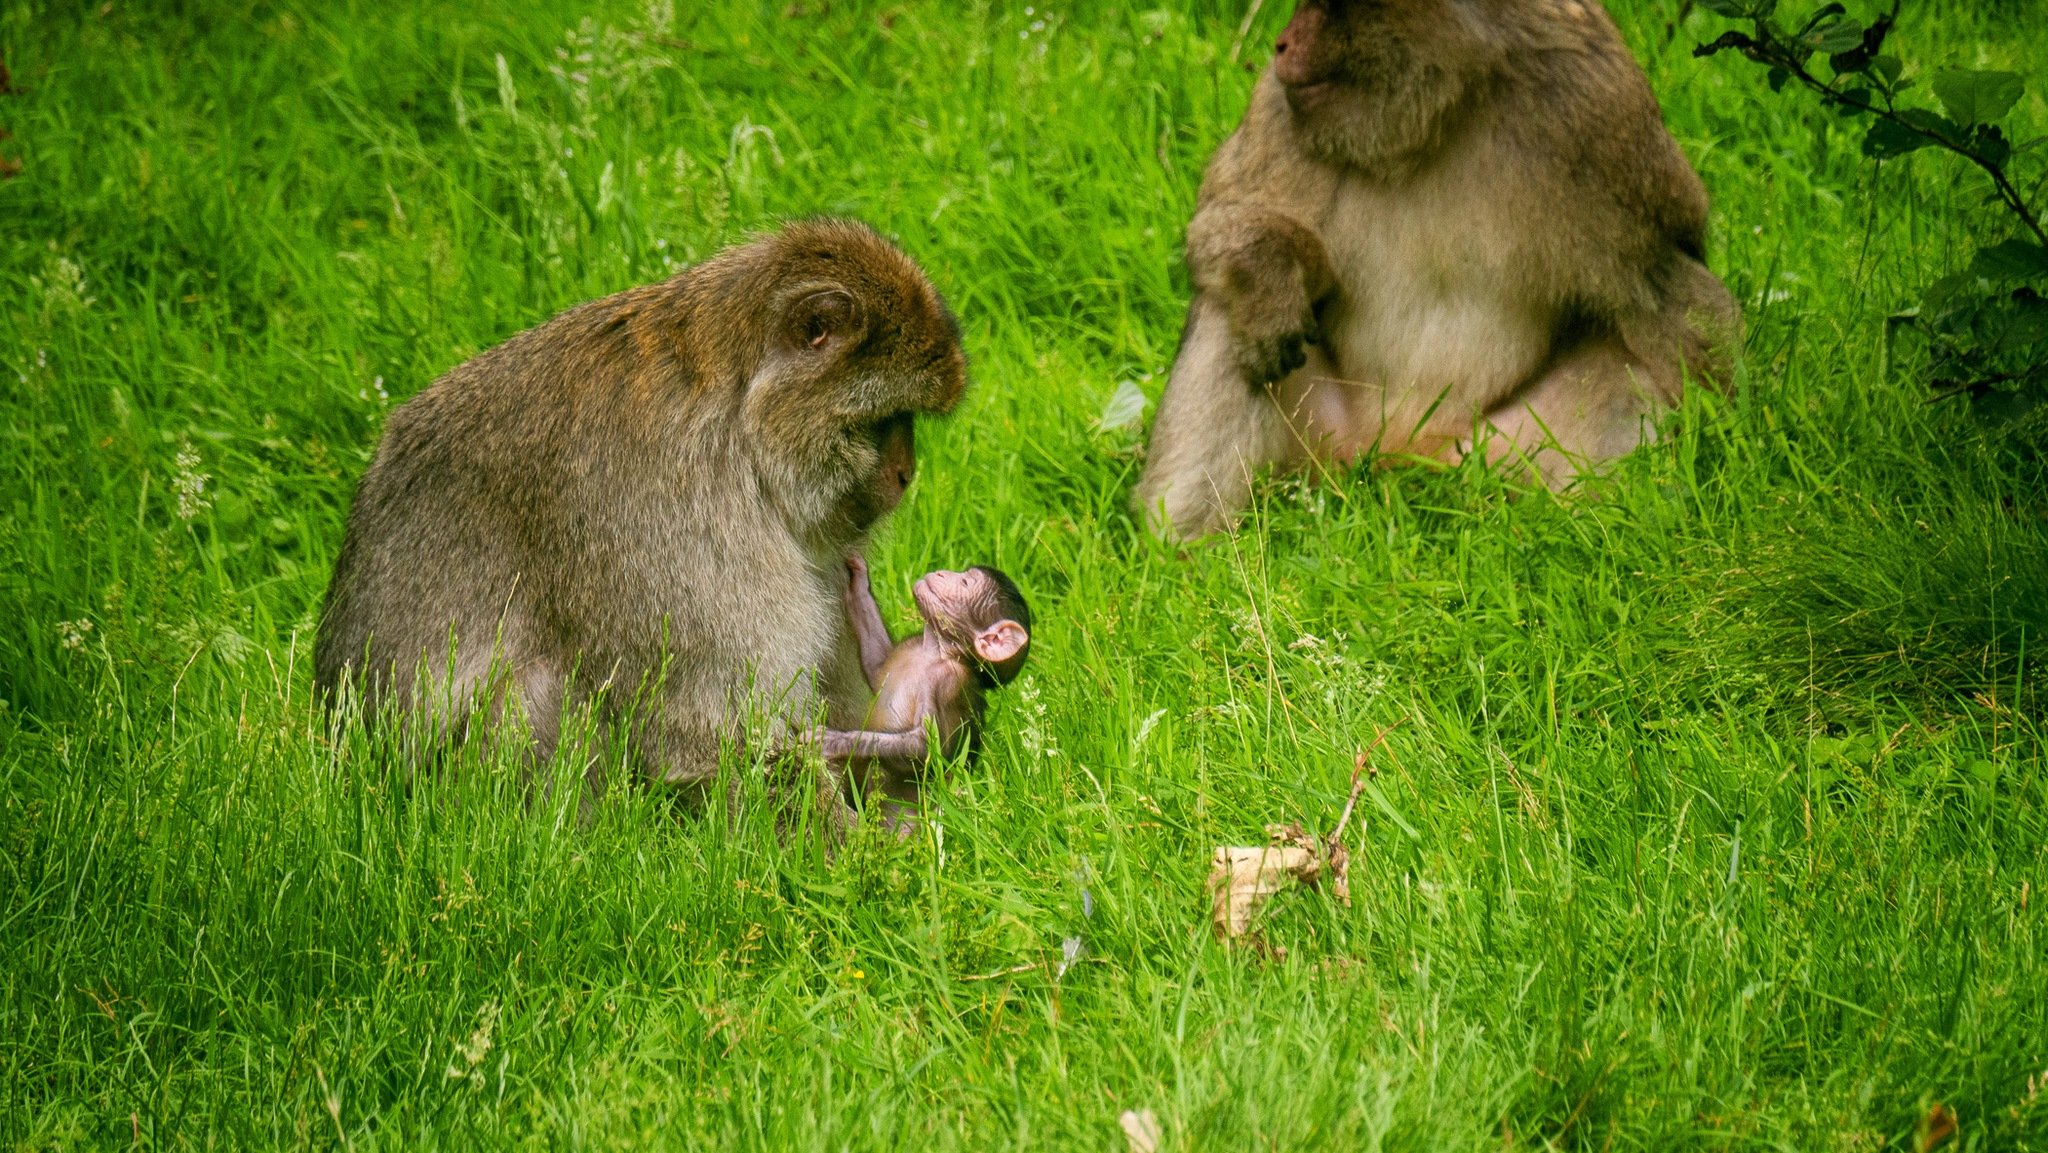 Explore the Monkey Forest in Staffordshire (yes, Staffordshire)